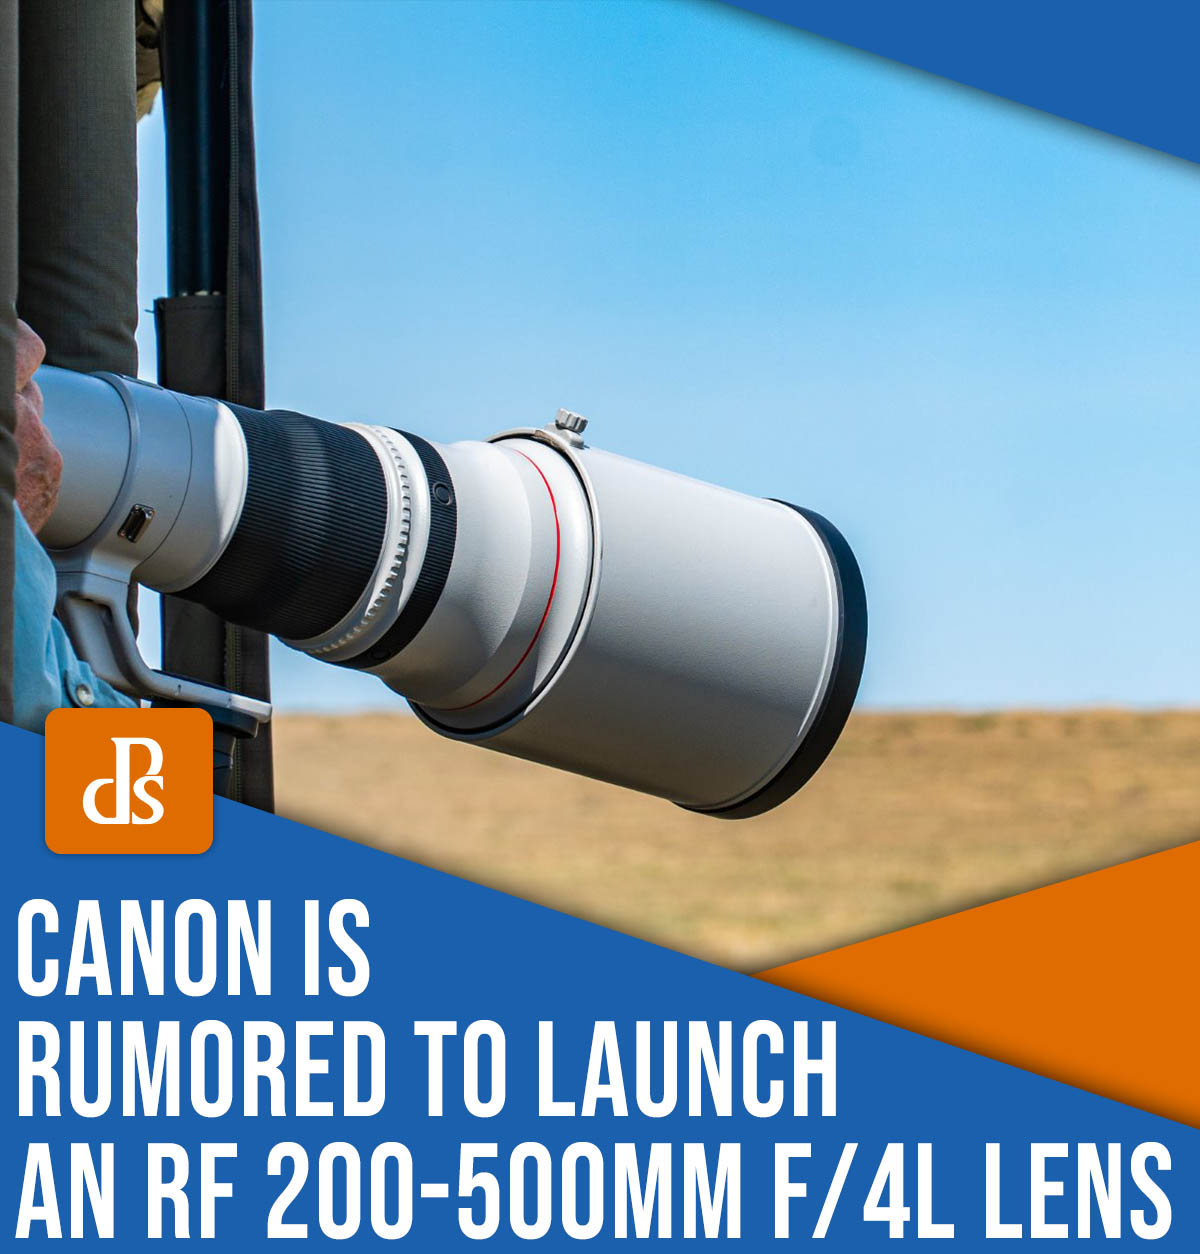 Canon is rumored to launch an RF 200-500mm f/4L lens